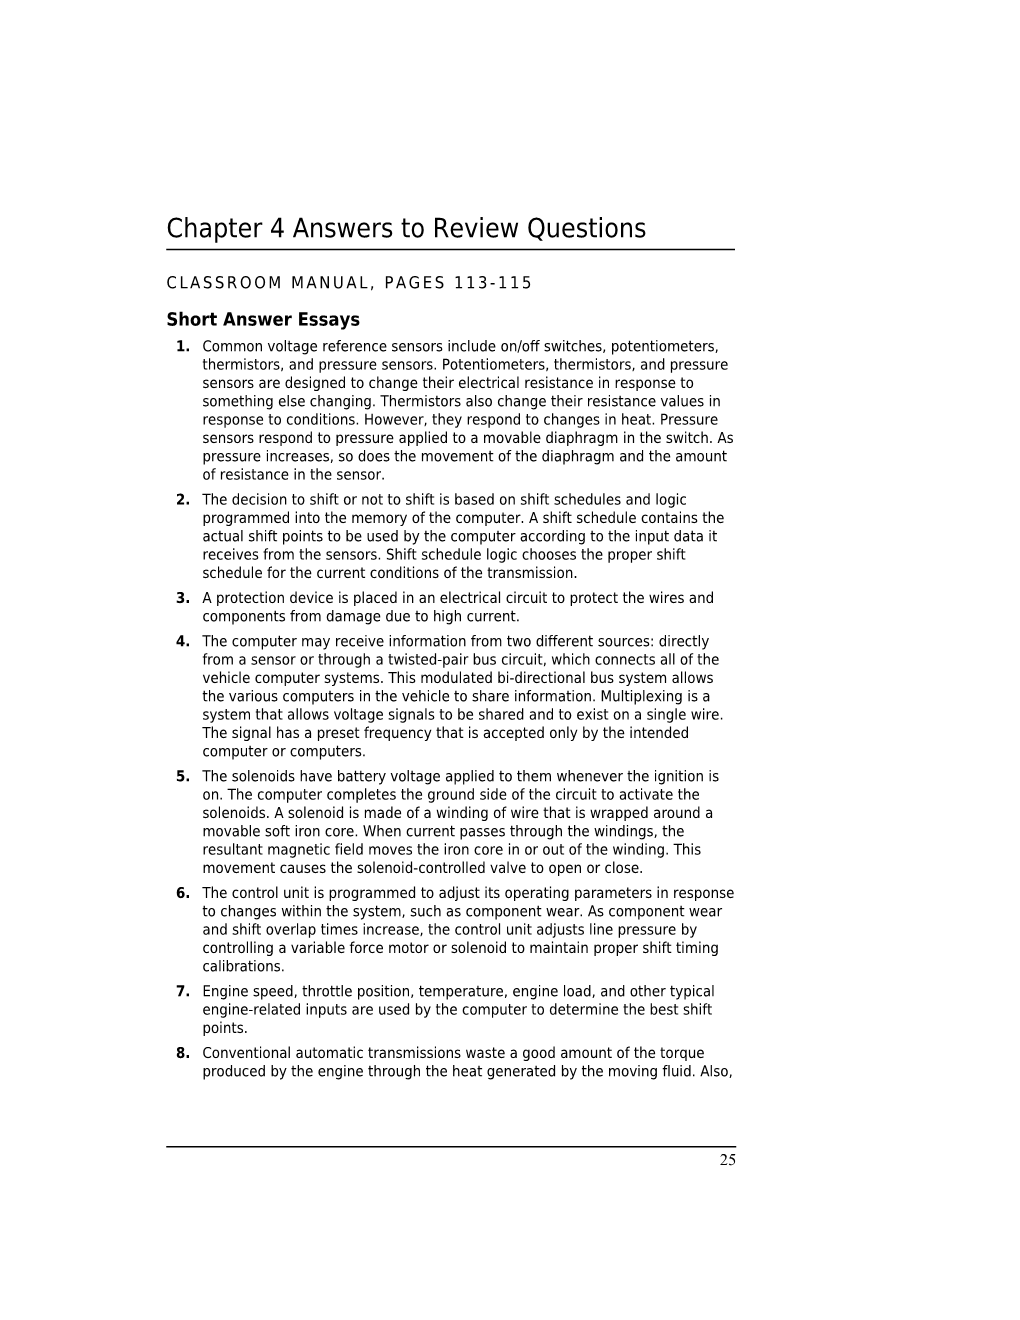 Chapter 4 Answers to Review Questions